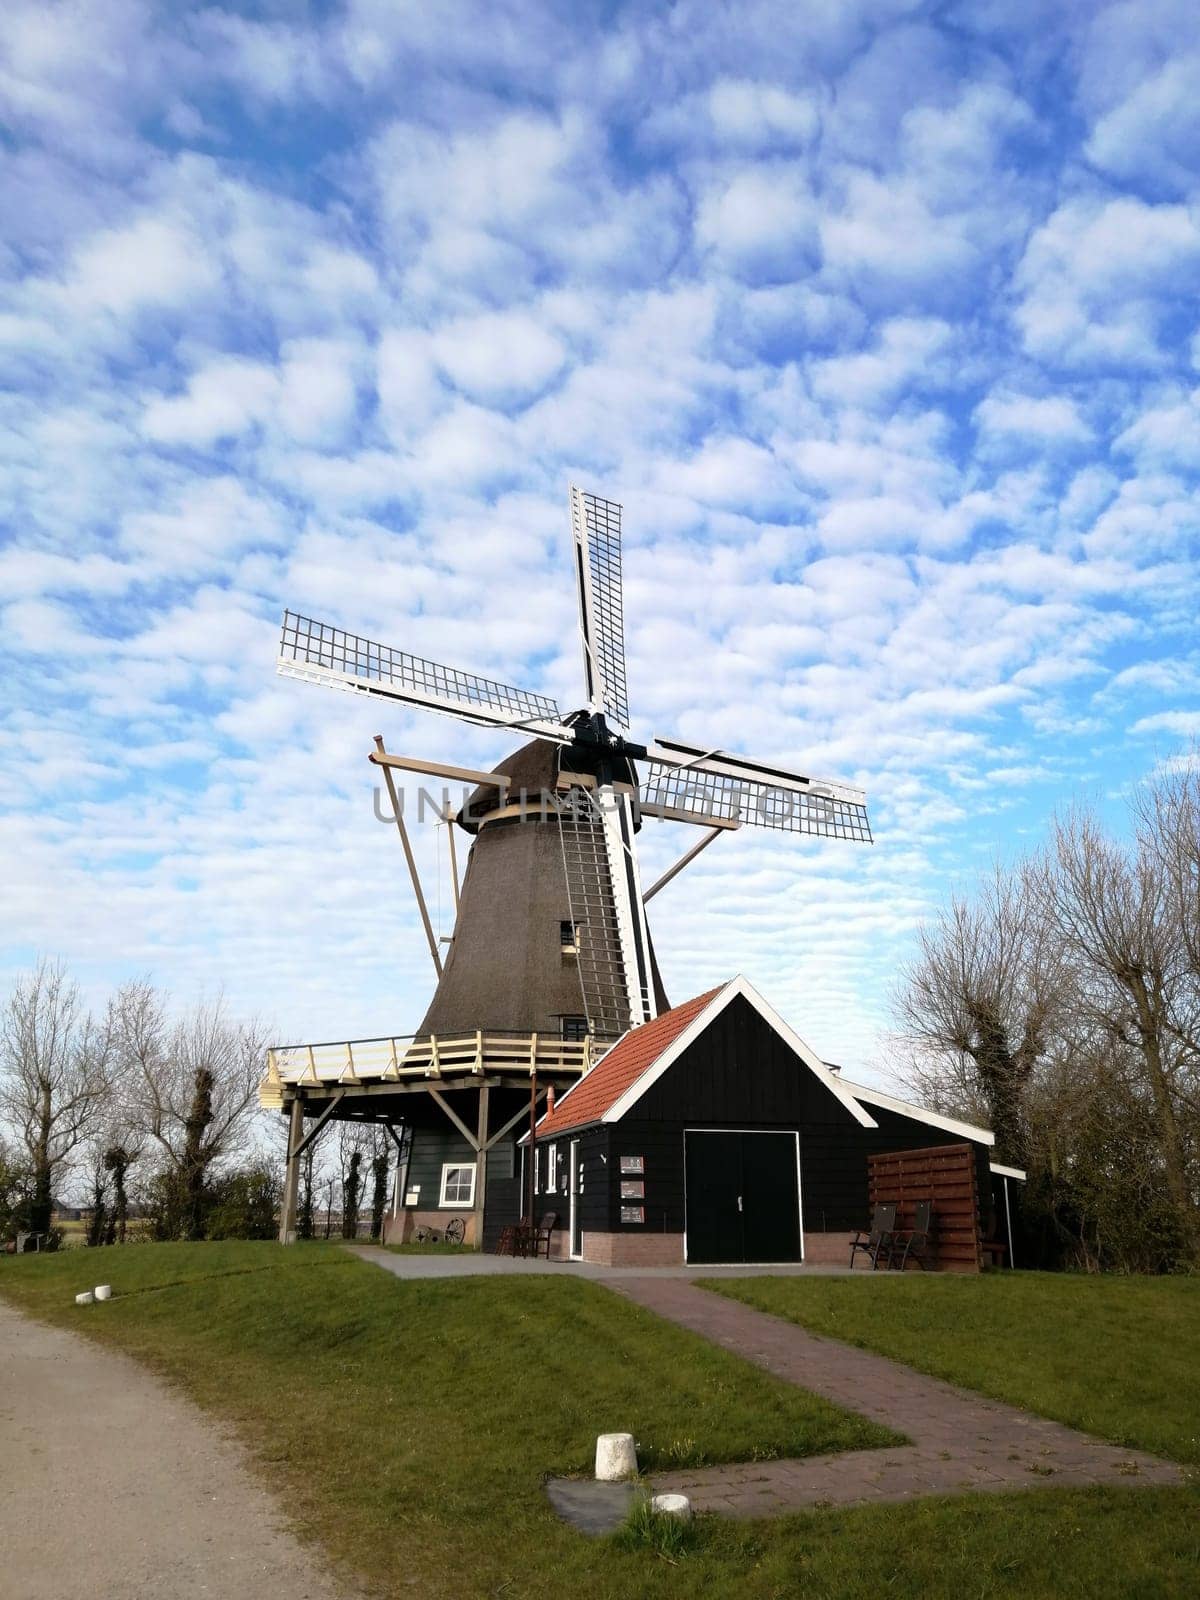 Dutch windmill with nice clouds in the background.